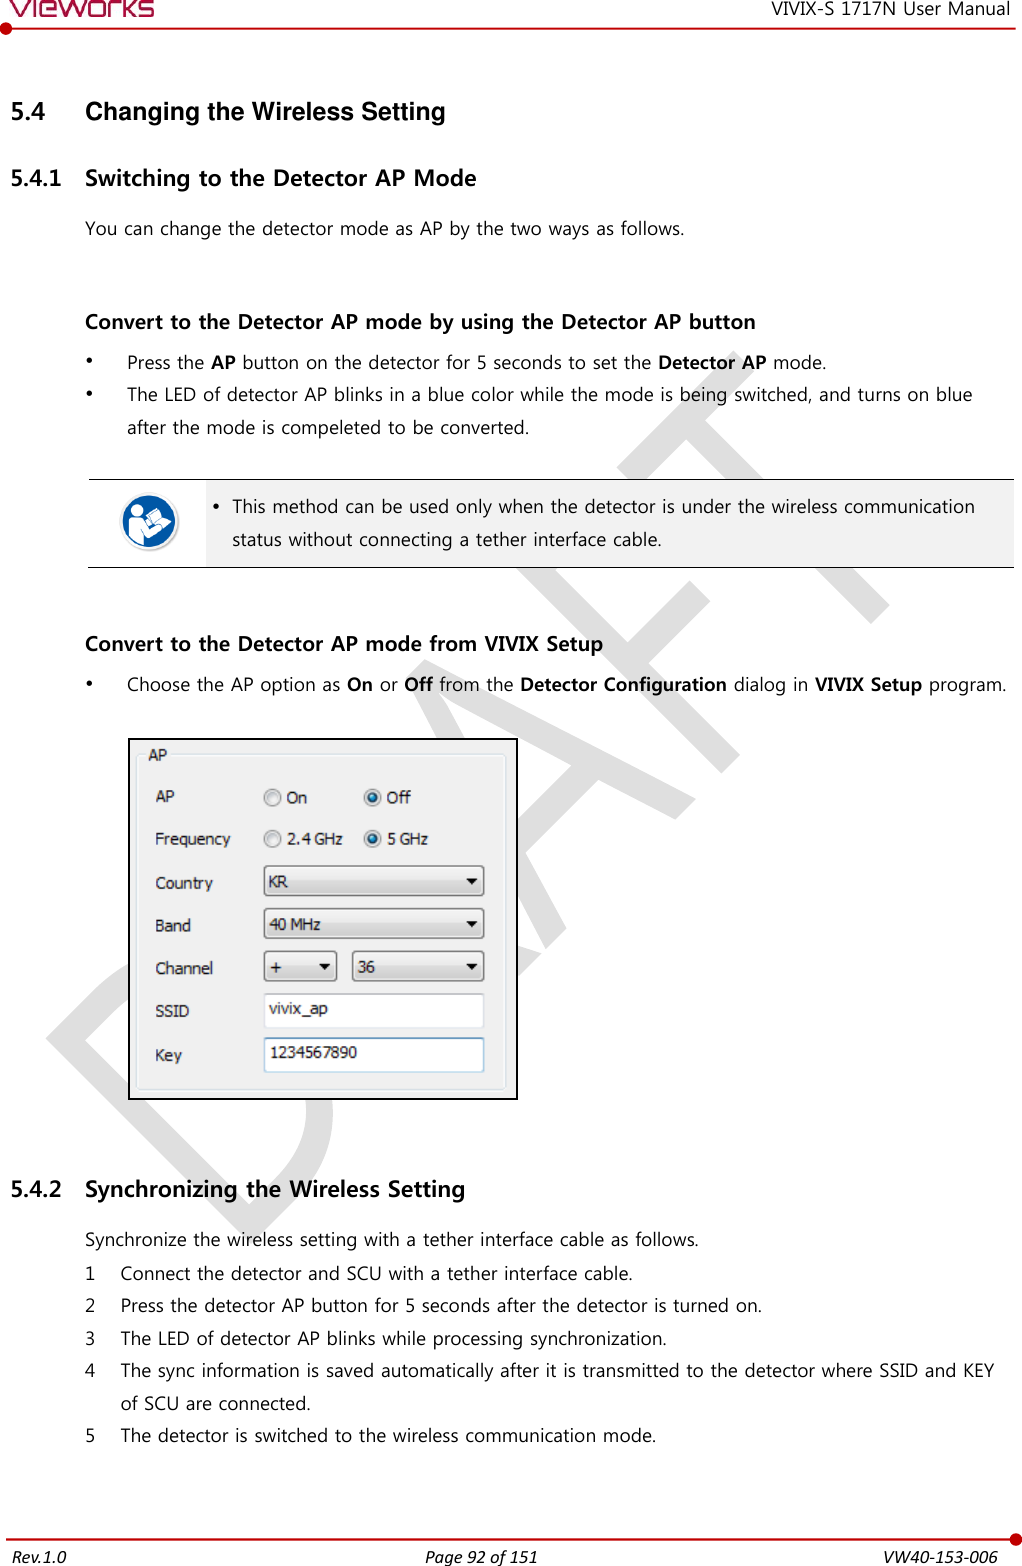   Rev.1.0 Page 92 of 151  VW40-153-006 VIVIX-S 1717N User Manual 5.4  Changing the Wireless Setting 5.4.1 Switching to the Detector AP Mode You can change the detector mode as AP by the two ways as follows.   Convert to the Detector AP mode by using the Detector AP button  Press the AP button on the detector for 5 seconds to set the Detector AP mode.  The LED of detector AP blinks in a blue color while the mode is being switched, and turns on blue after the mode is compeleted to be converted.    This method can be used only when the detector is under the wireless communication status without connecting a tether interface cable.   Convert to the Detector AP mode from VIVIX Setup  Choose the AP option as On or Off from the Detector Configuration dialog in VIVIX Setup program.    5.4.2 Synchronizing the Wireless Setting Synchronize the wireless setting with a tether interface cable as follows. 1 Connect the detector and SCU with a tether interface cable. 2 Press the detector AP button for 5 seconds after the detector is turned on. 3 The LED of detector AP blinks while processing synchronization. 4 The sync information is saved automatically after it is transmitted to the detector where SSID and KEY of SCU are connected. 5 The detector is switched to the wireless communication mode. 